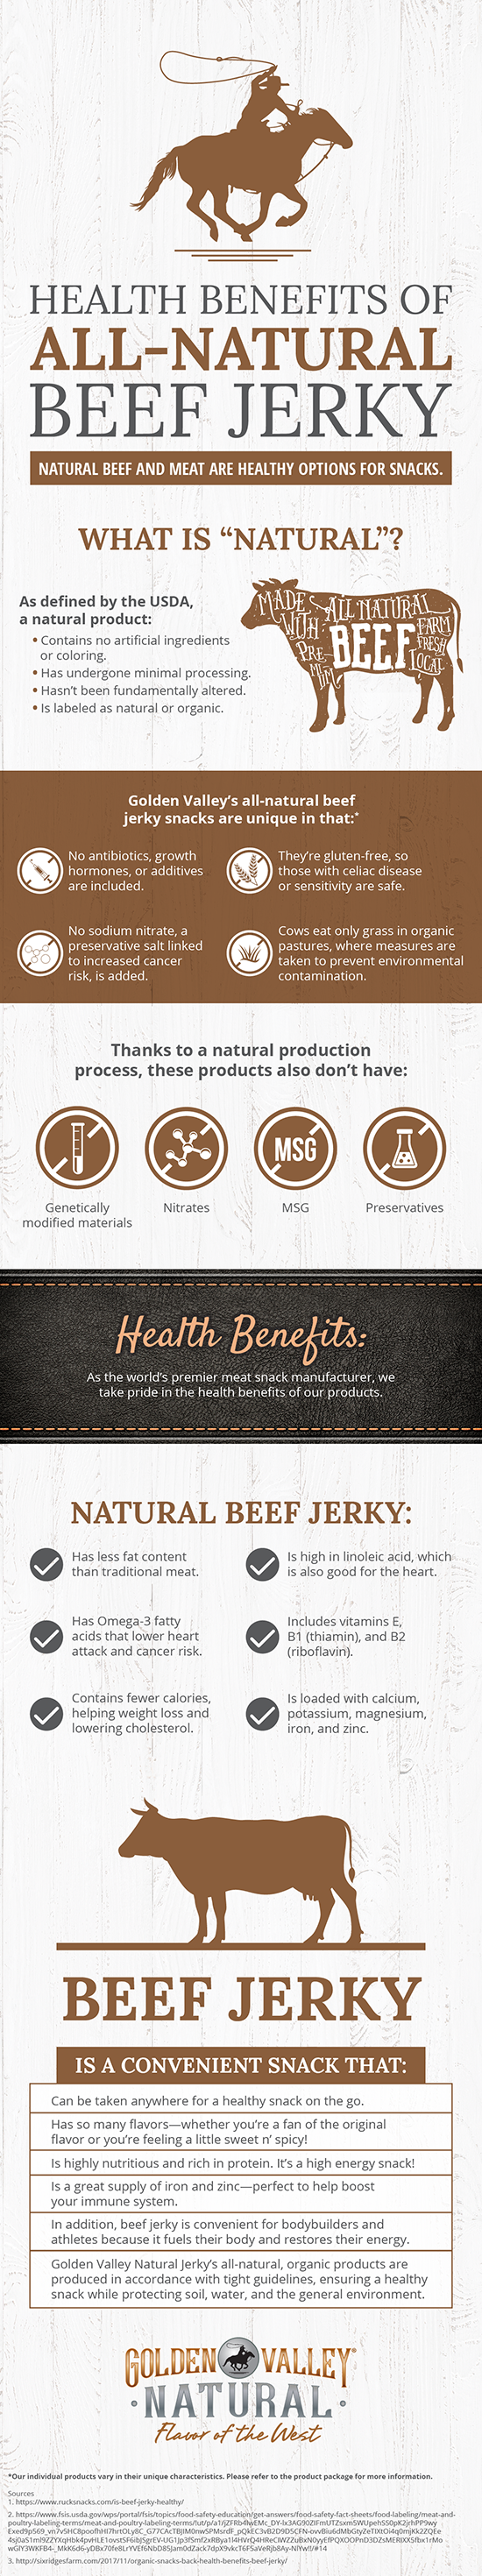 Health Benefits of All-Natural Beef Jerky